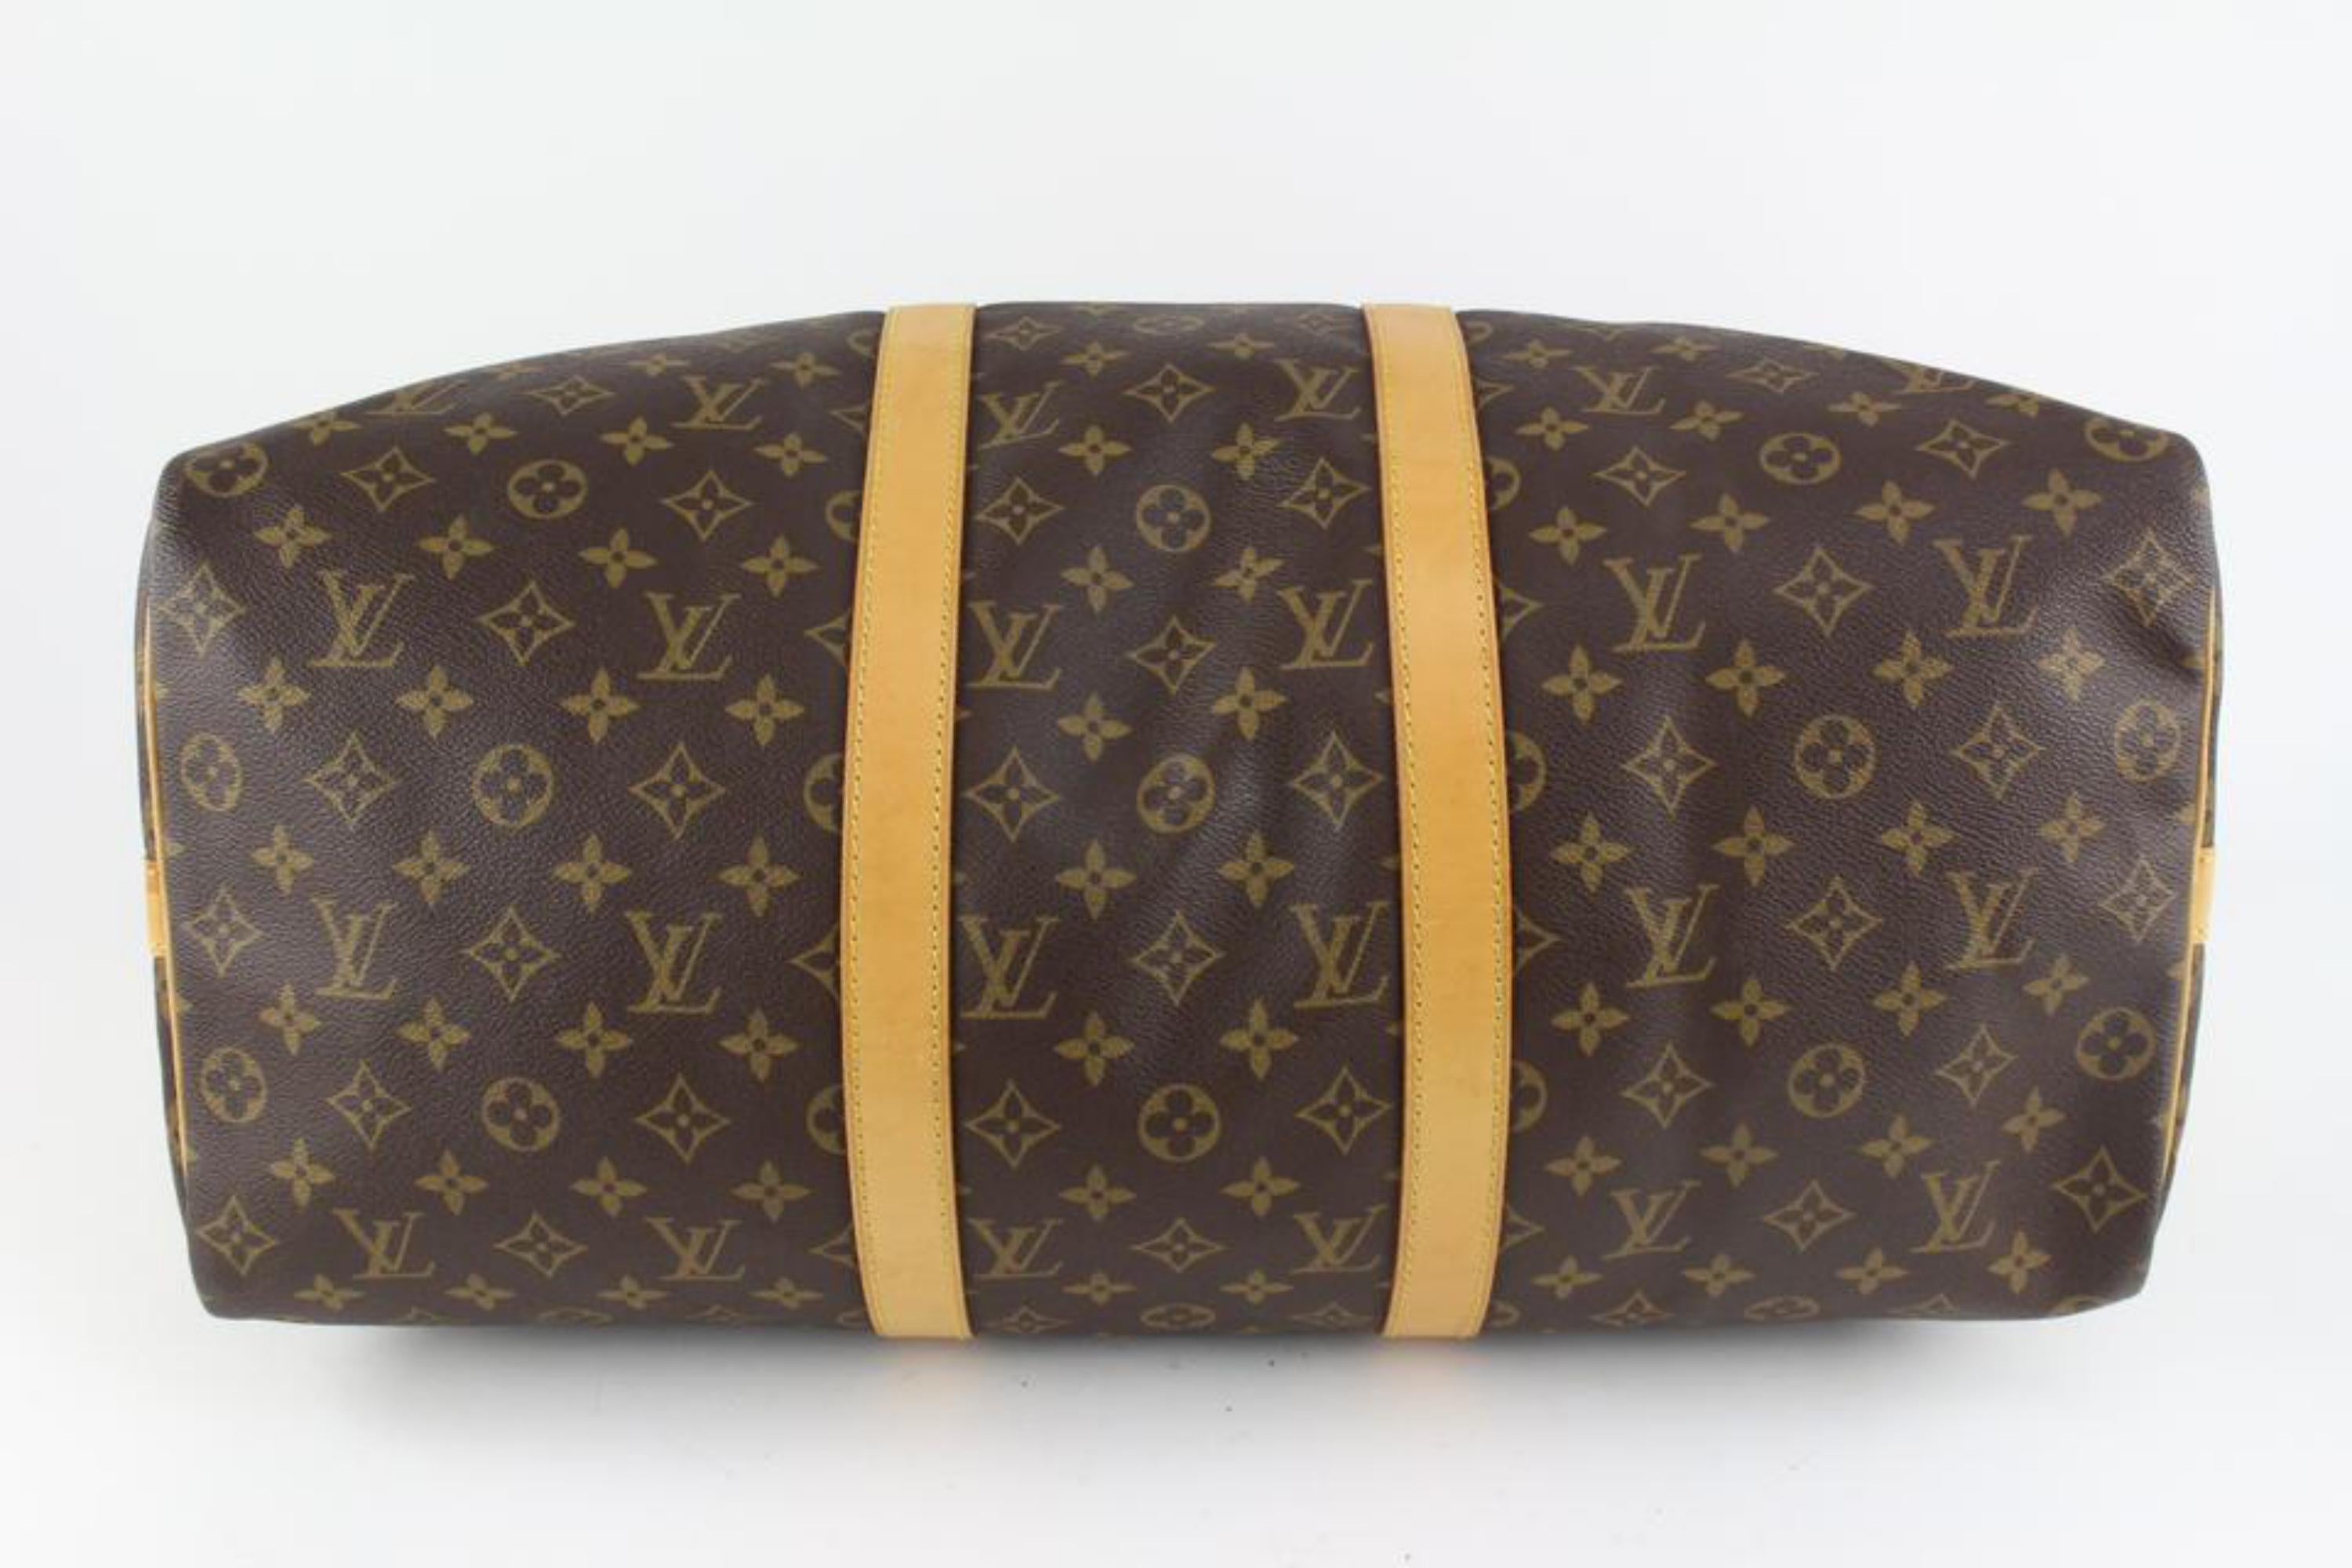 Louis Vuitton Monogram Keepall Bandouliere 45 Duffle Bag with Strap 1221lv15 4